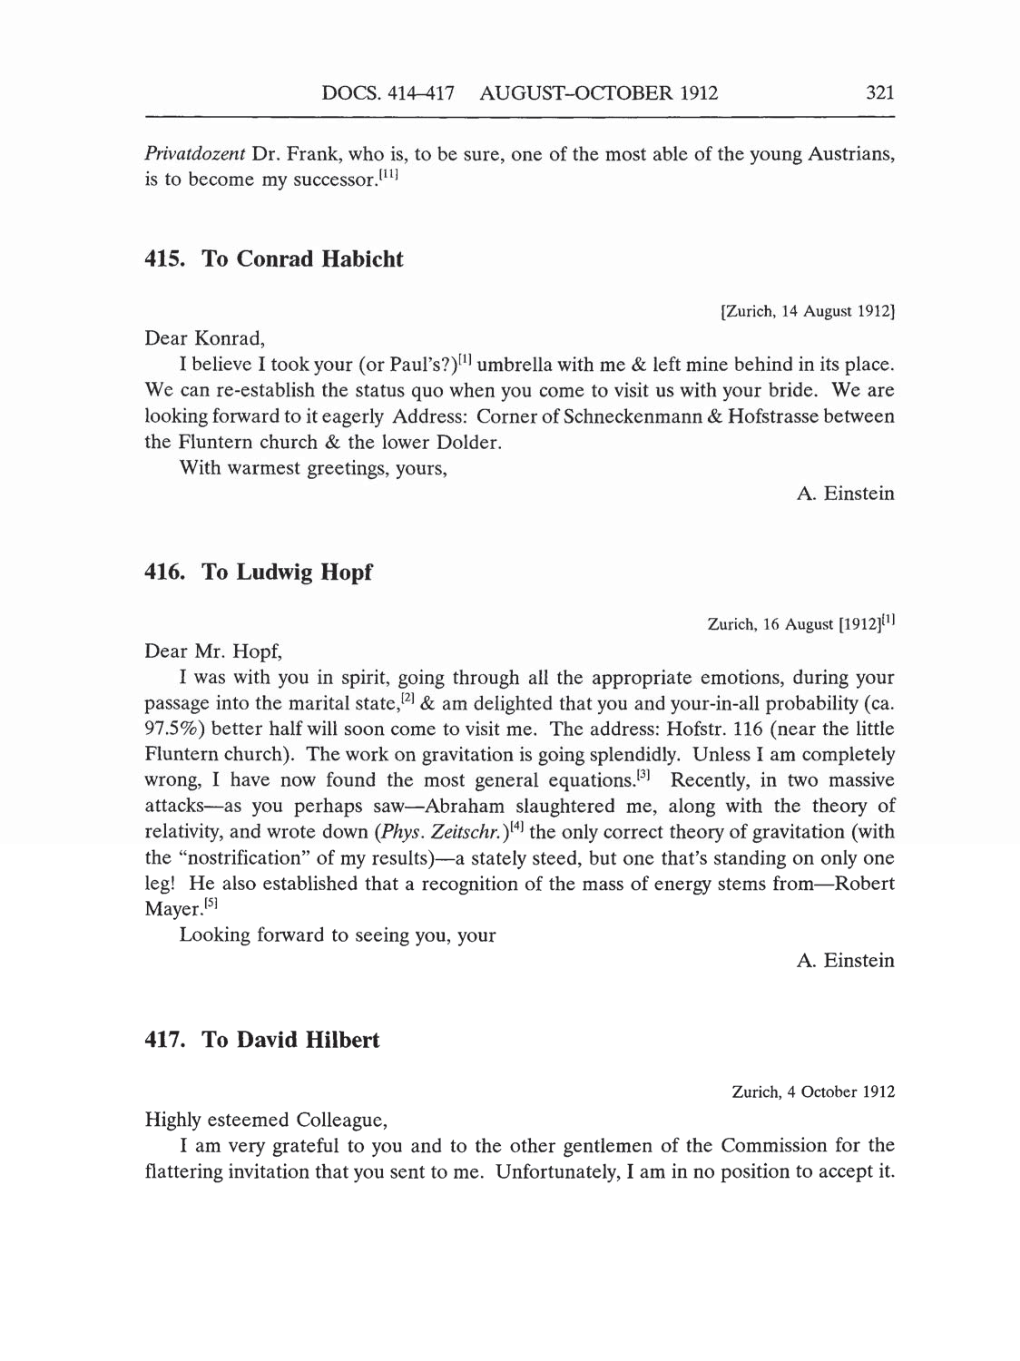 Volume 5: The Swiss Years: Correspondence, 1902-1914 (English translation supplement) page 321